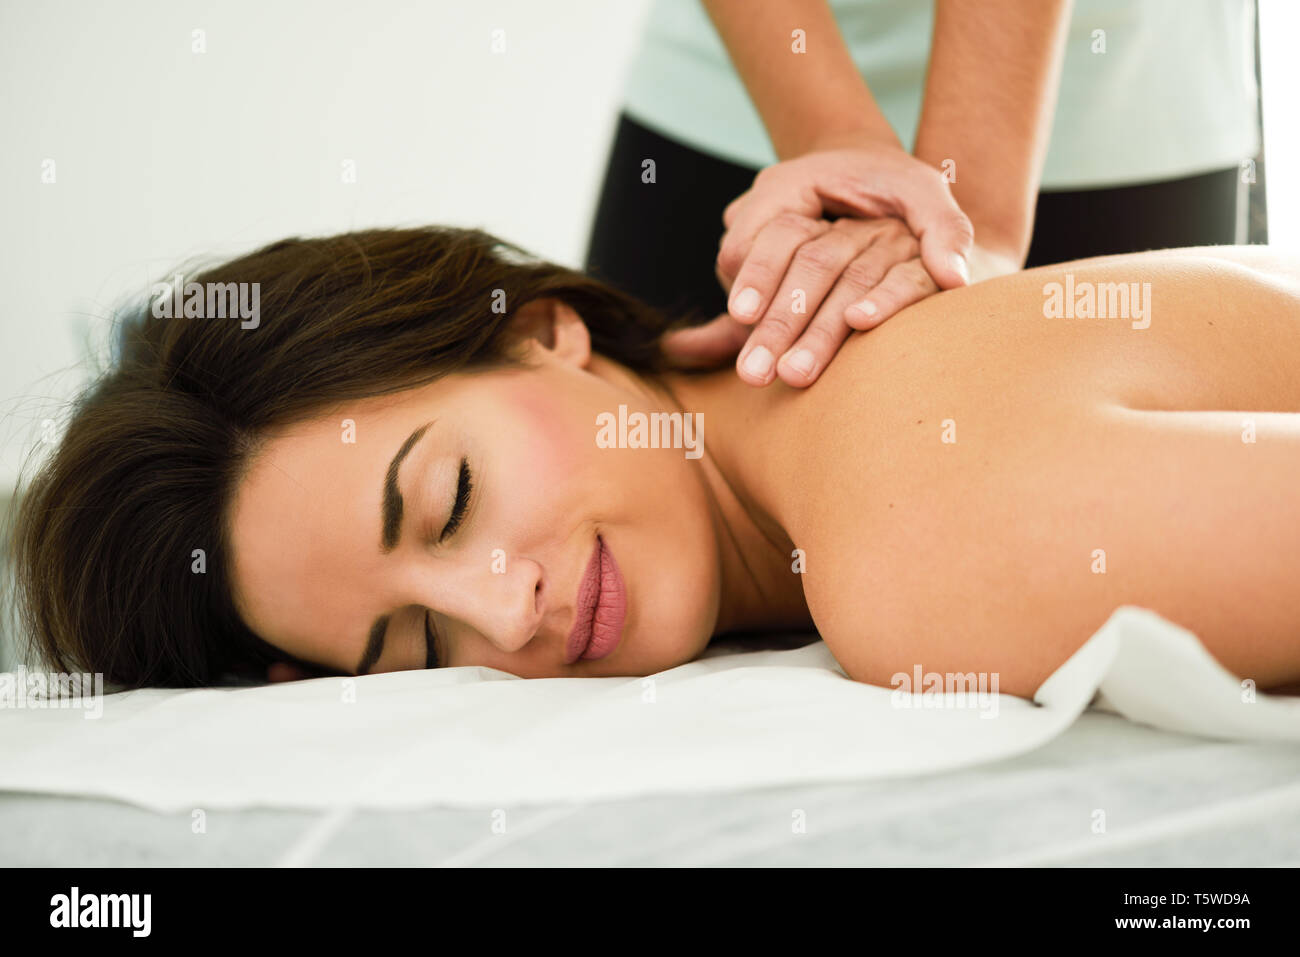 Young woman receiving a back massage in a spa center. Stock Photo